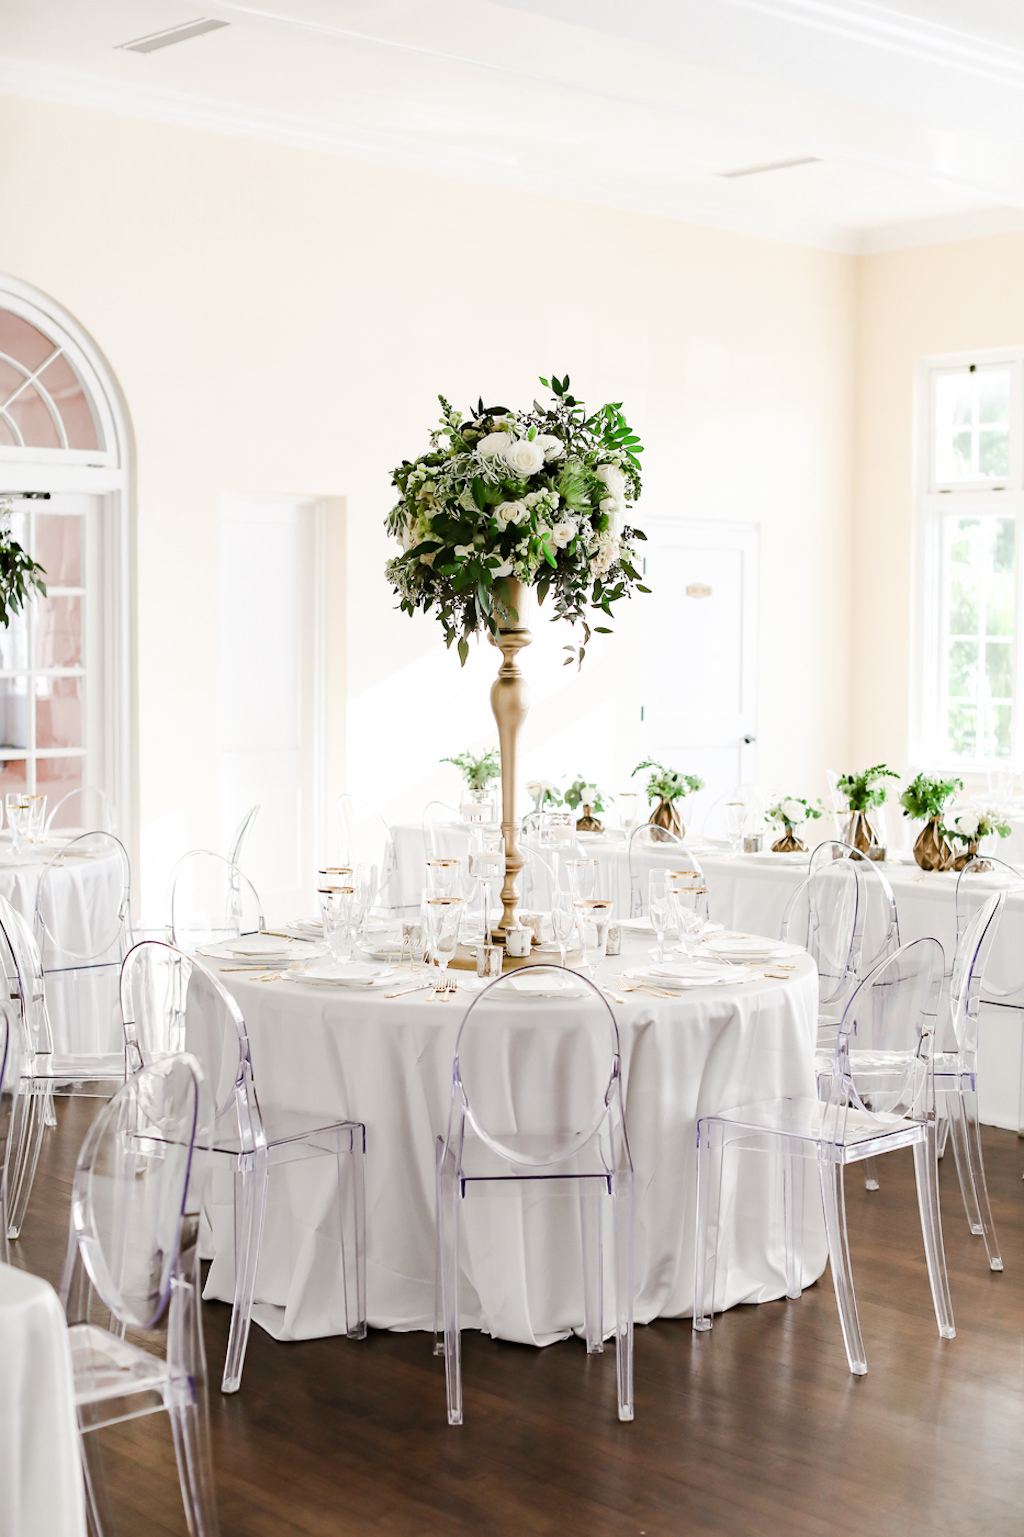 Classic, Neutral Wedding Reception Decor, Round Table with White Linen, Clear Ghost Acrylic Chairs, Tall Gold Candlestick Vase with Greenery and Ivory, White Floral Centerpiece | Tampa Bay Wedding Photographer Lifelong Photography Studio | Wedding Rentals Kate Ryan Event Rentals